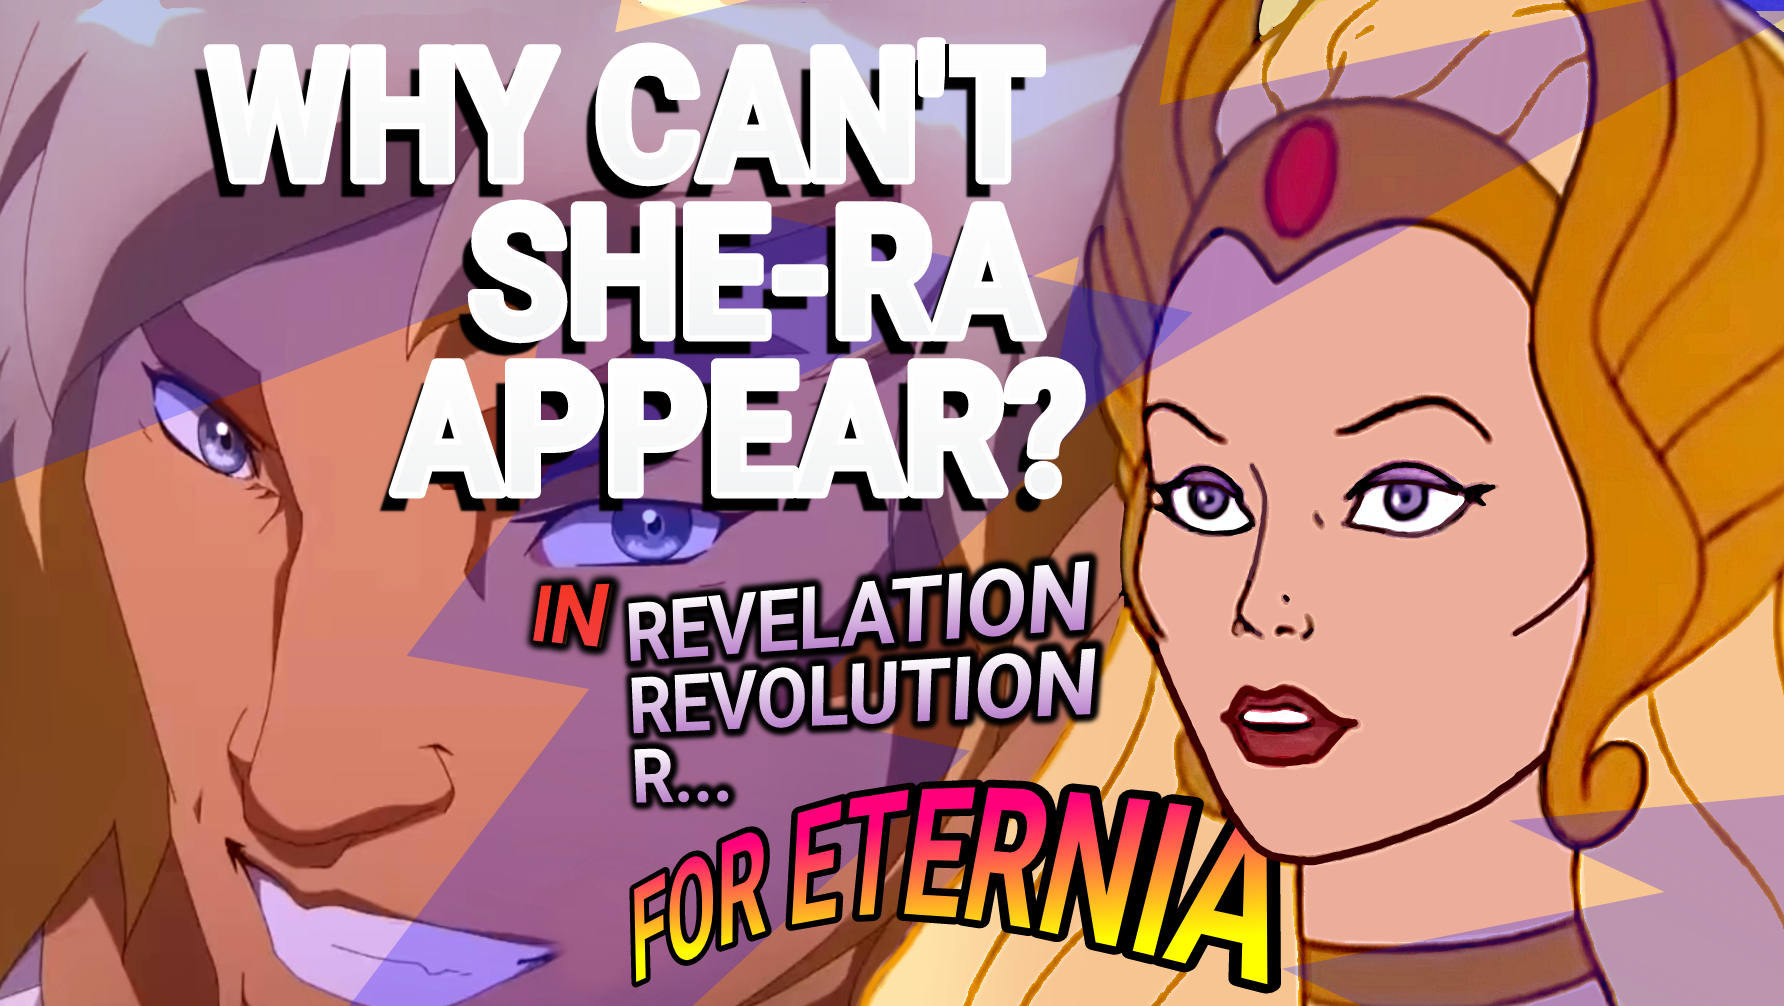 Will She-Ra appear in a New Season of ”Masters of the Universe: Revelation”?